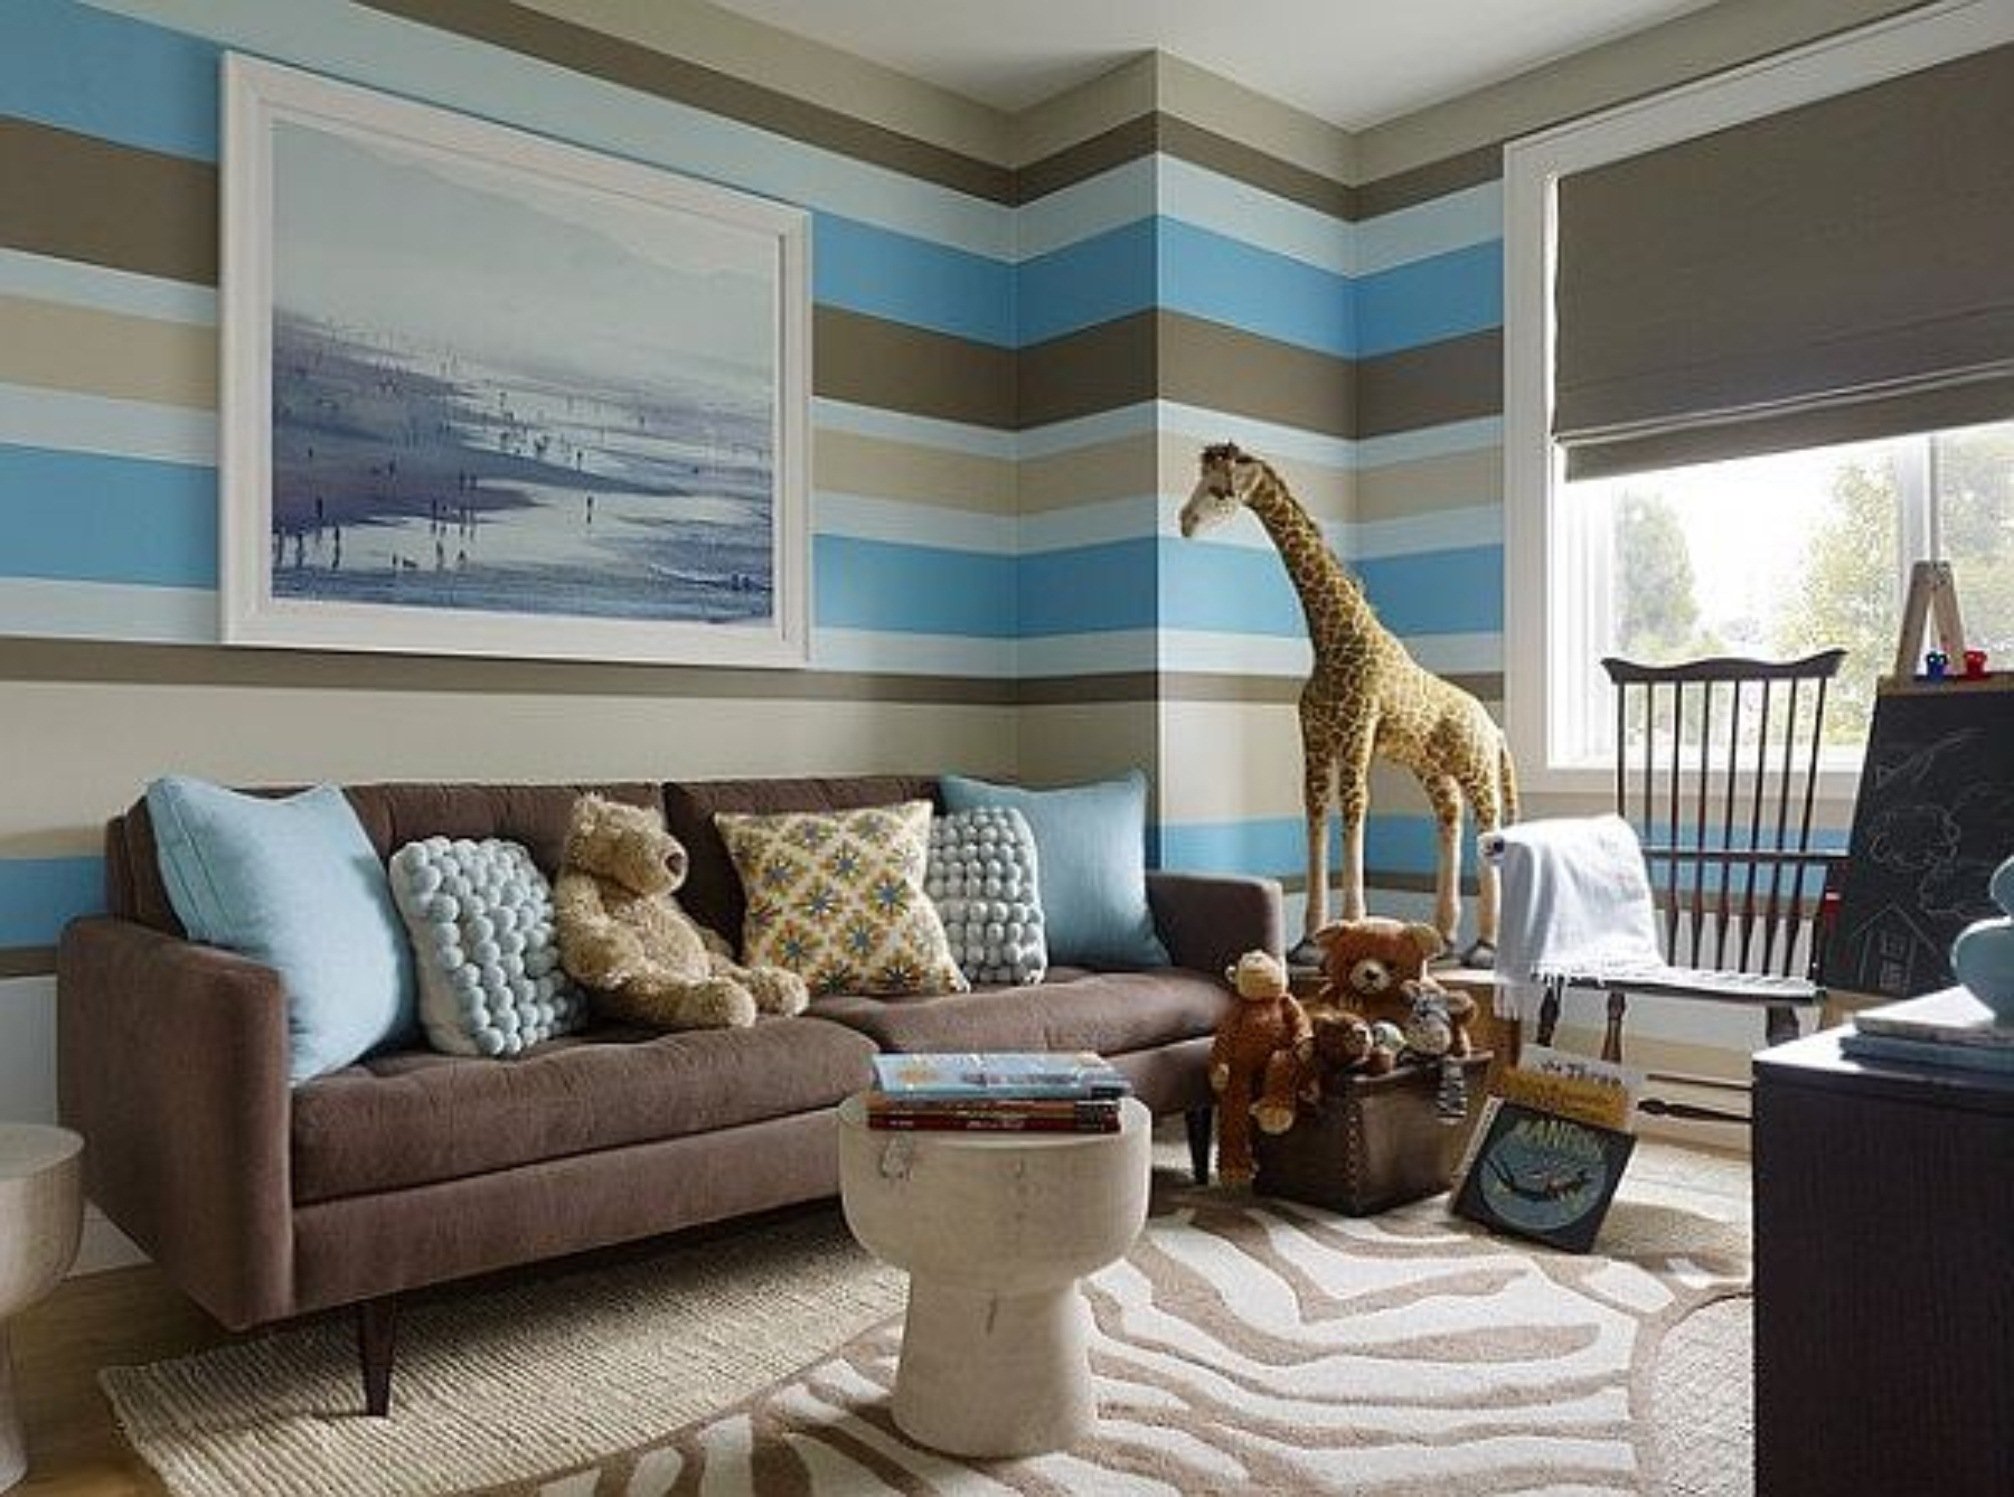 10 Fantastic Brown And Blue Living Room Ideas chocolate brown and blue living room ideas with large wall painting 2022